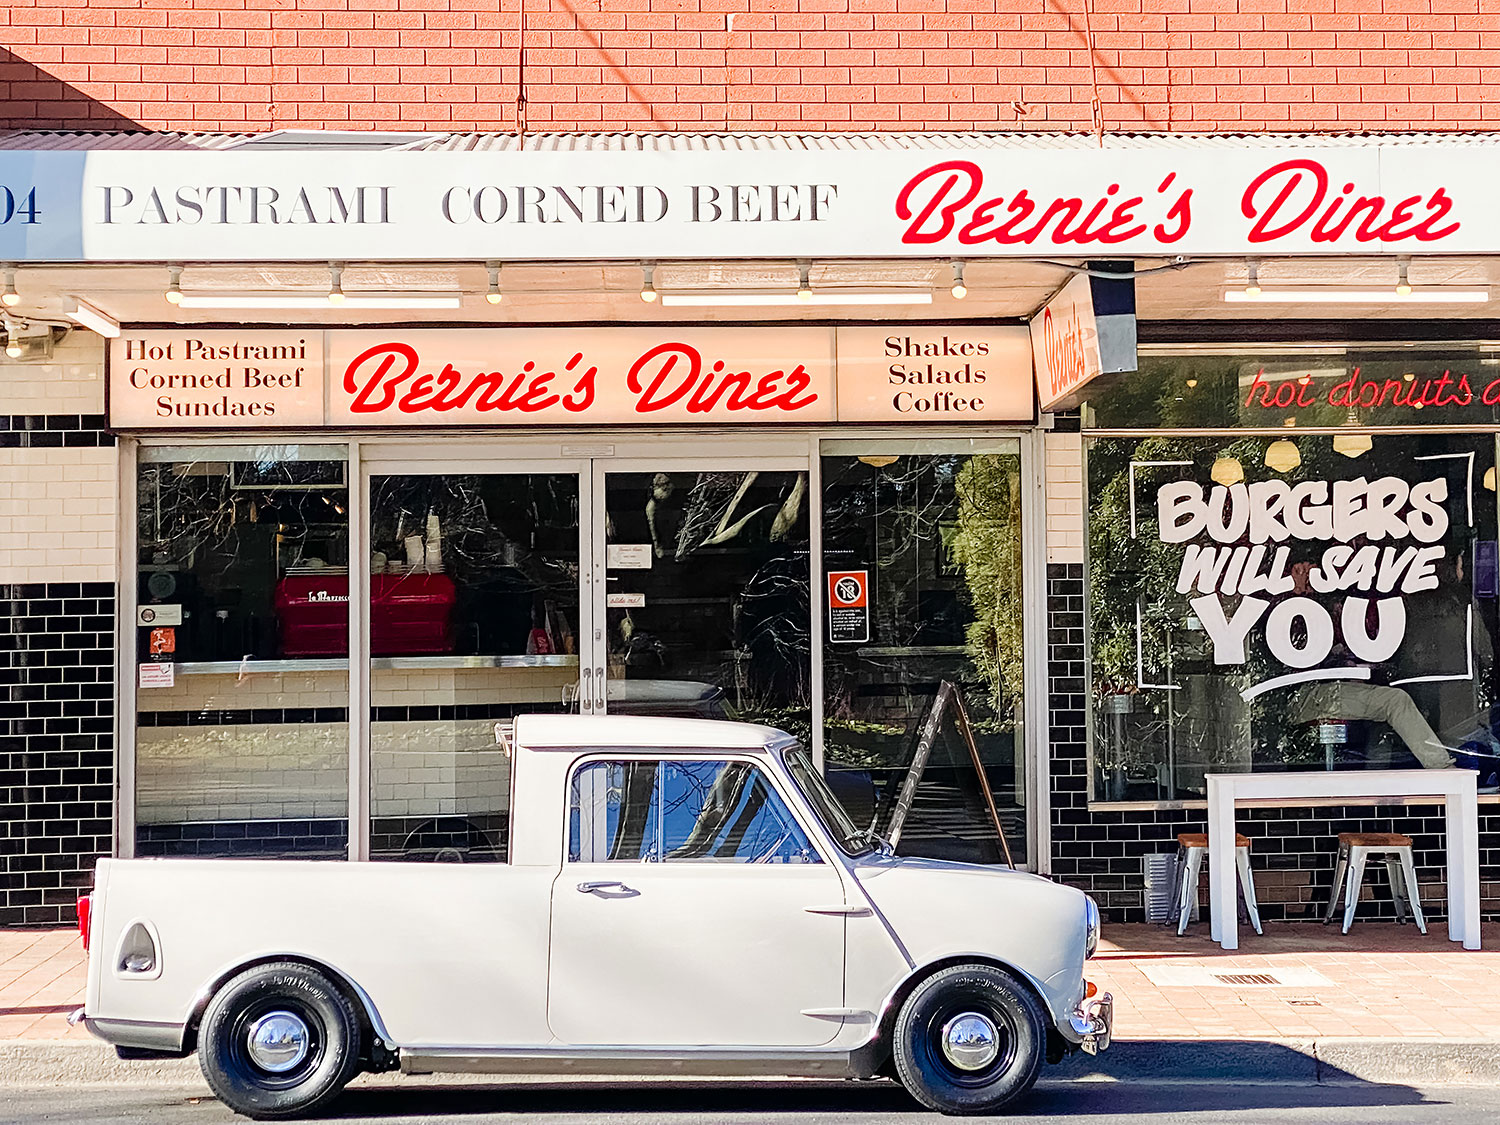 Benie's Diner - this American style diner is a multi-generational icon